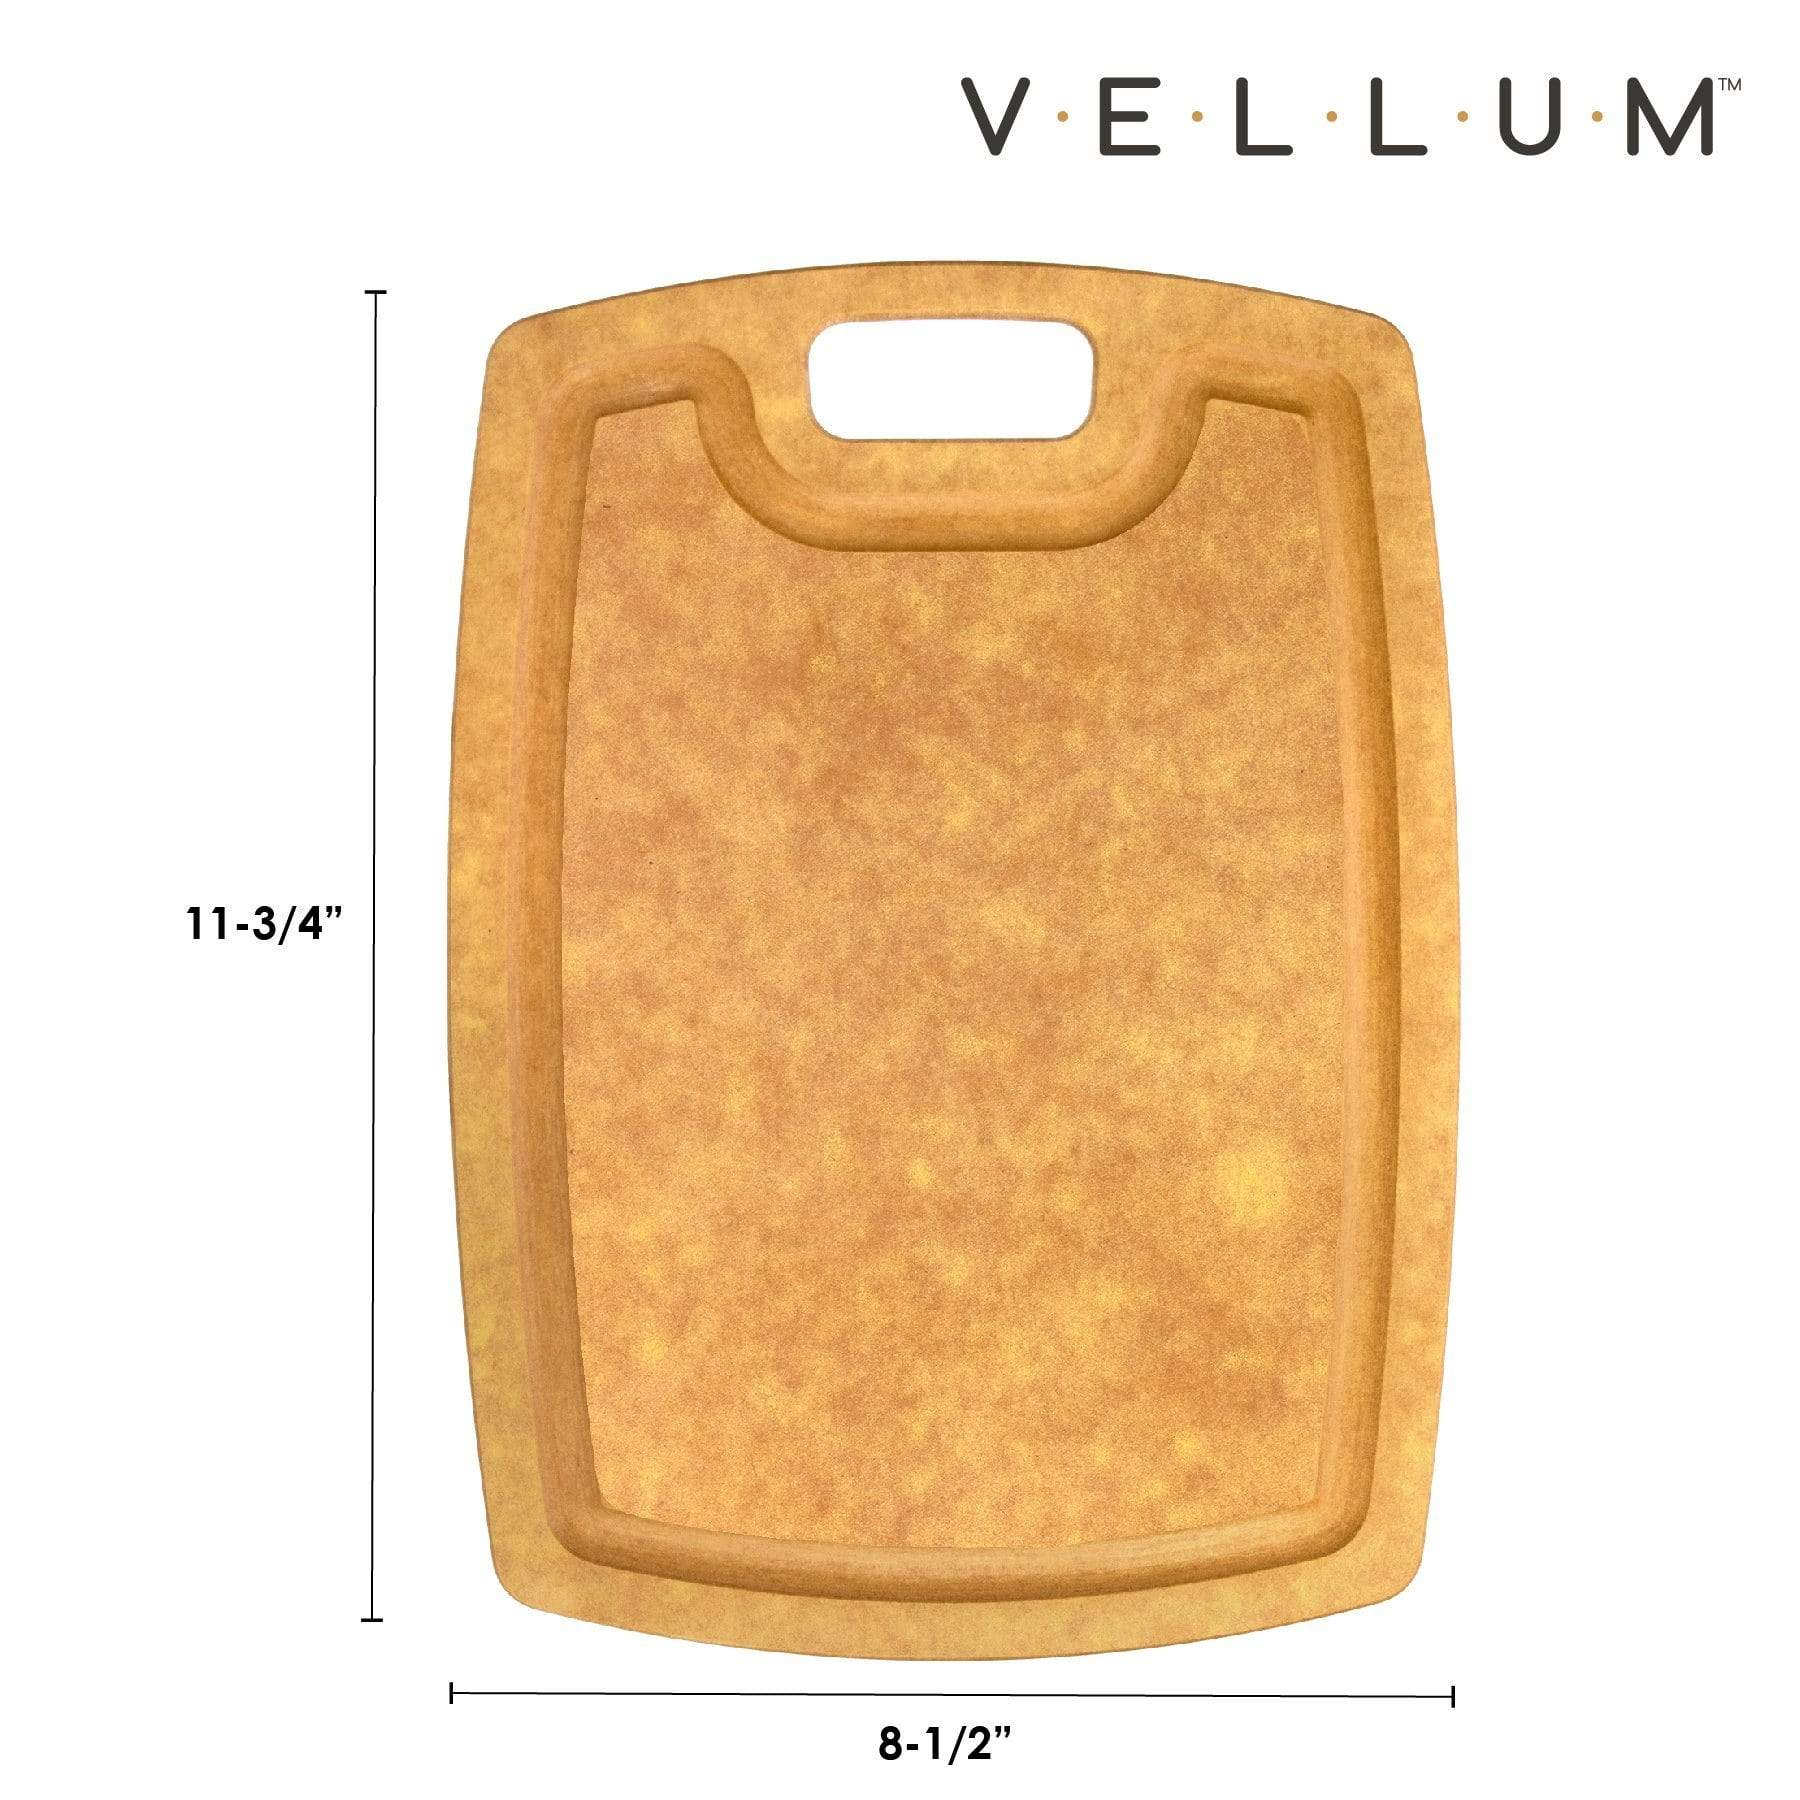 Totally Bamboo Vellum™ Wood Paper Composite Cutting Board with Juice Groove, 11-3/4" x 8-1/2" | Dishwasher Safe